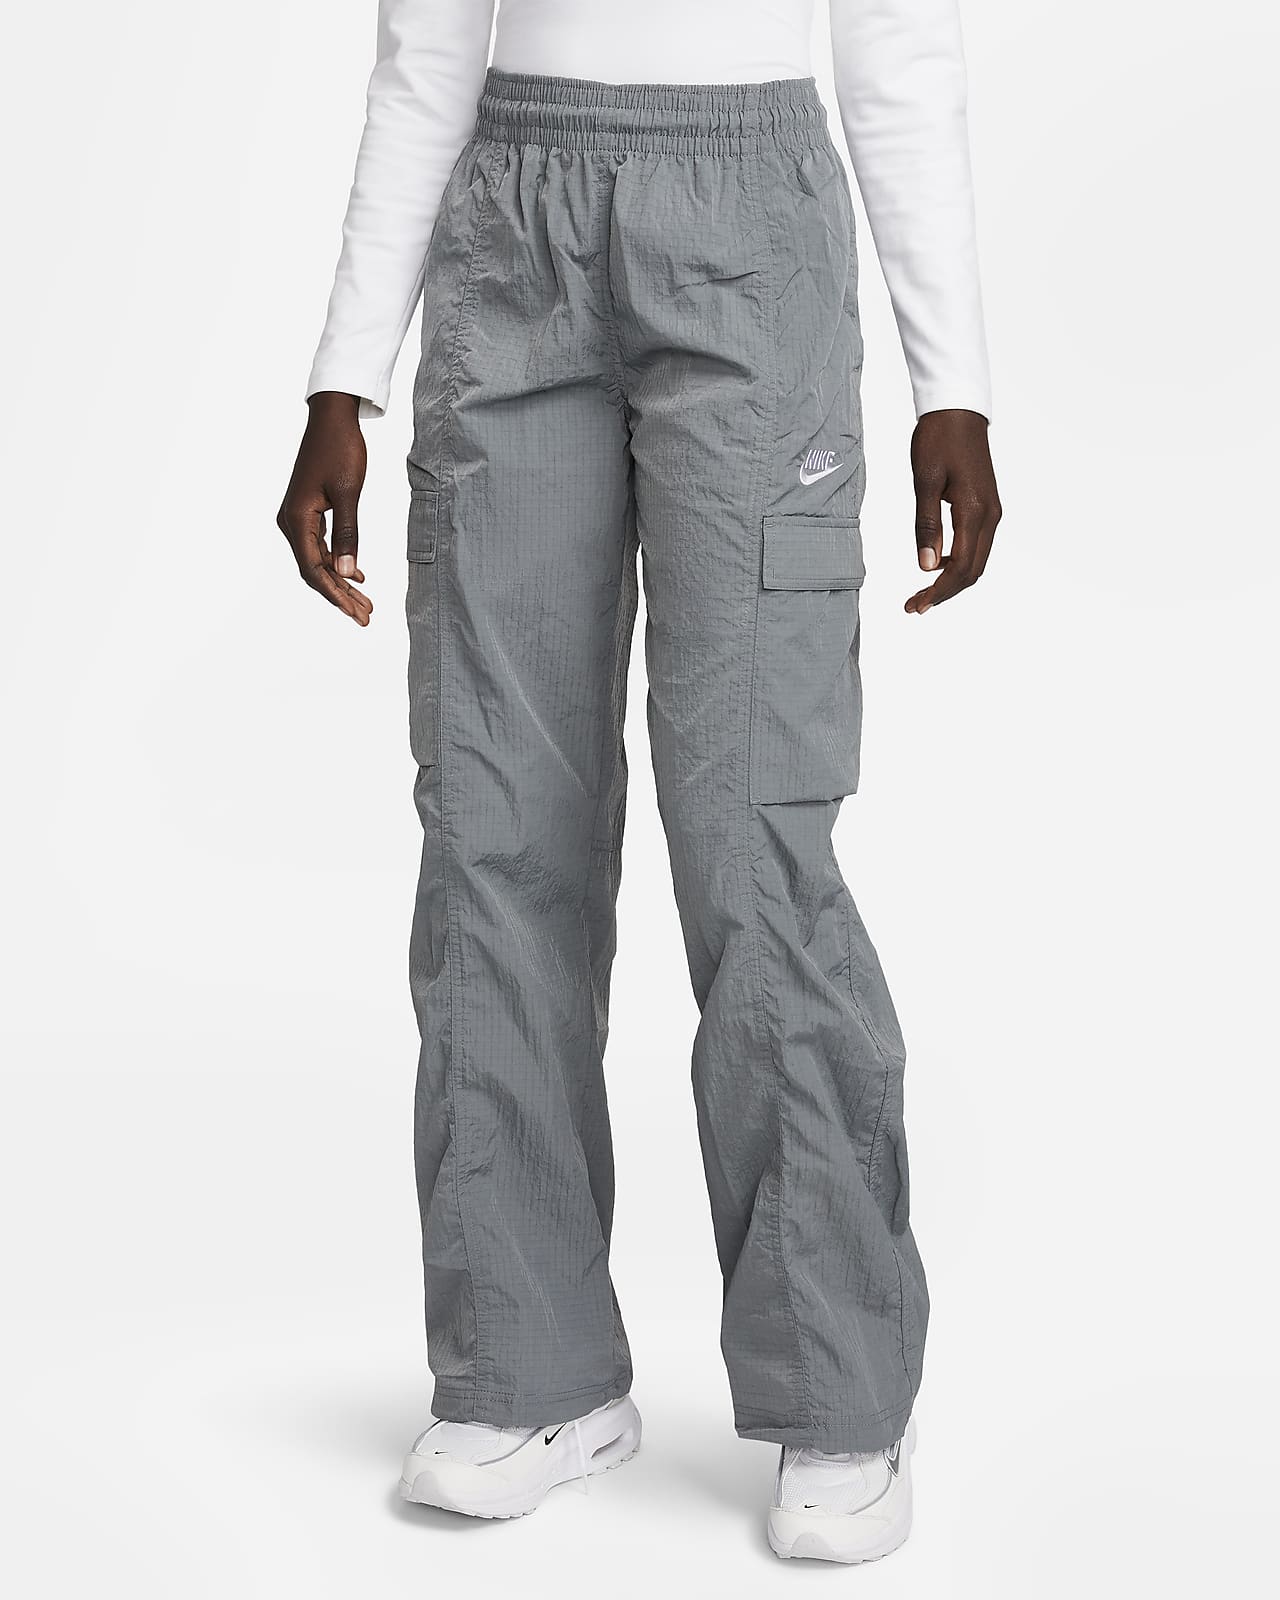 Nike CLUB CARGO WOVEN PANT Grey  BSTN Store